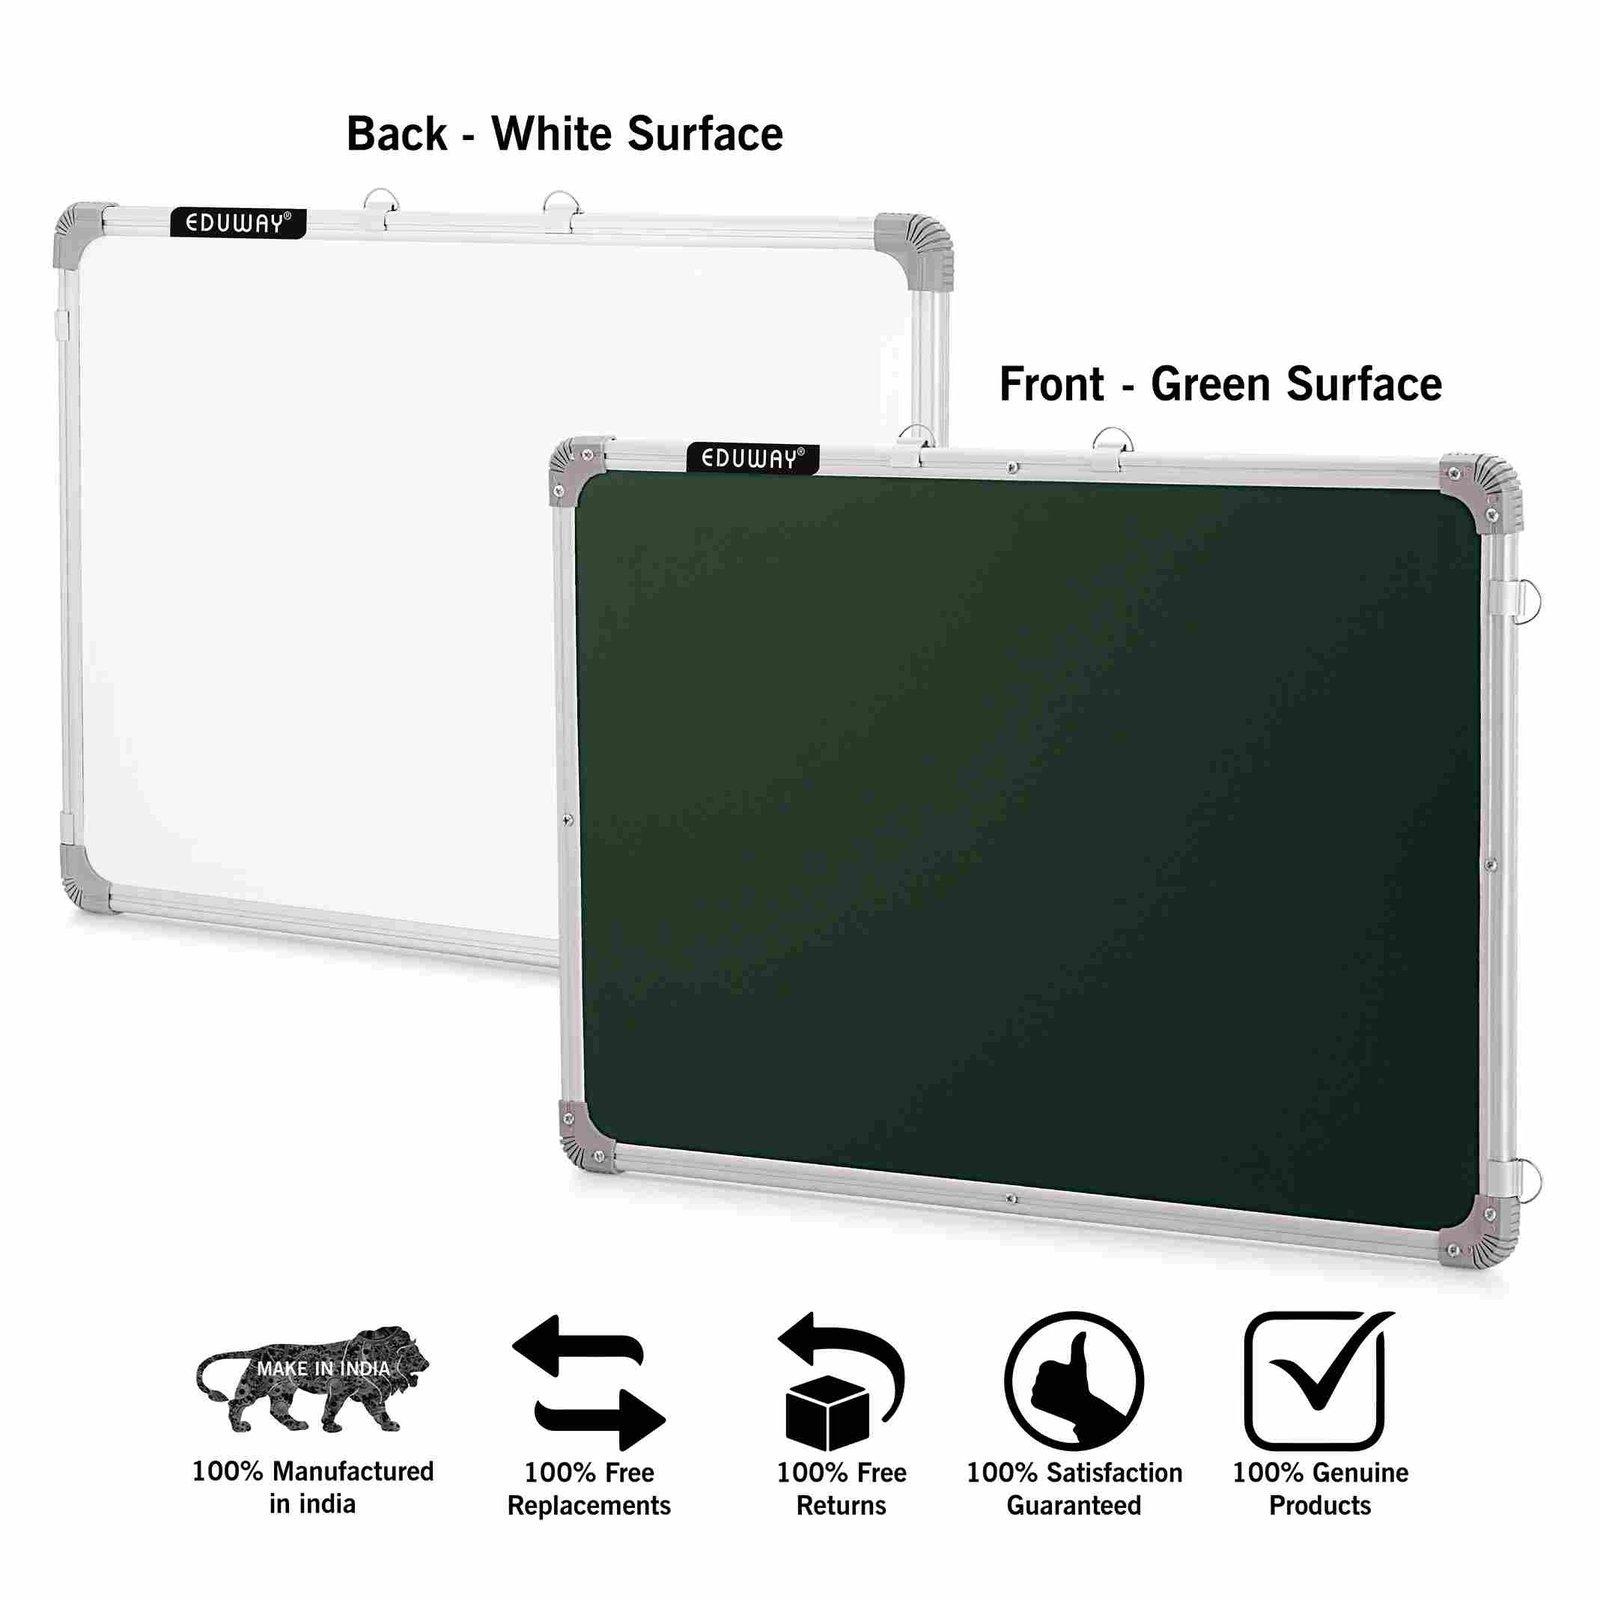 chalkboad green surface non magnetic back side white surface front and back view